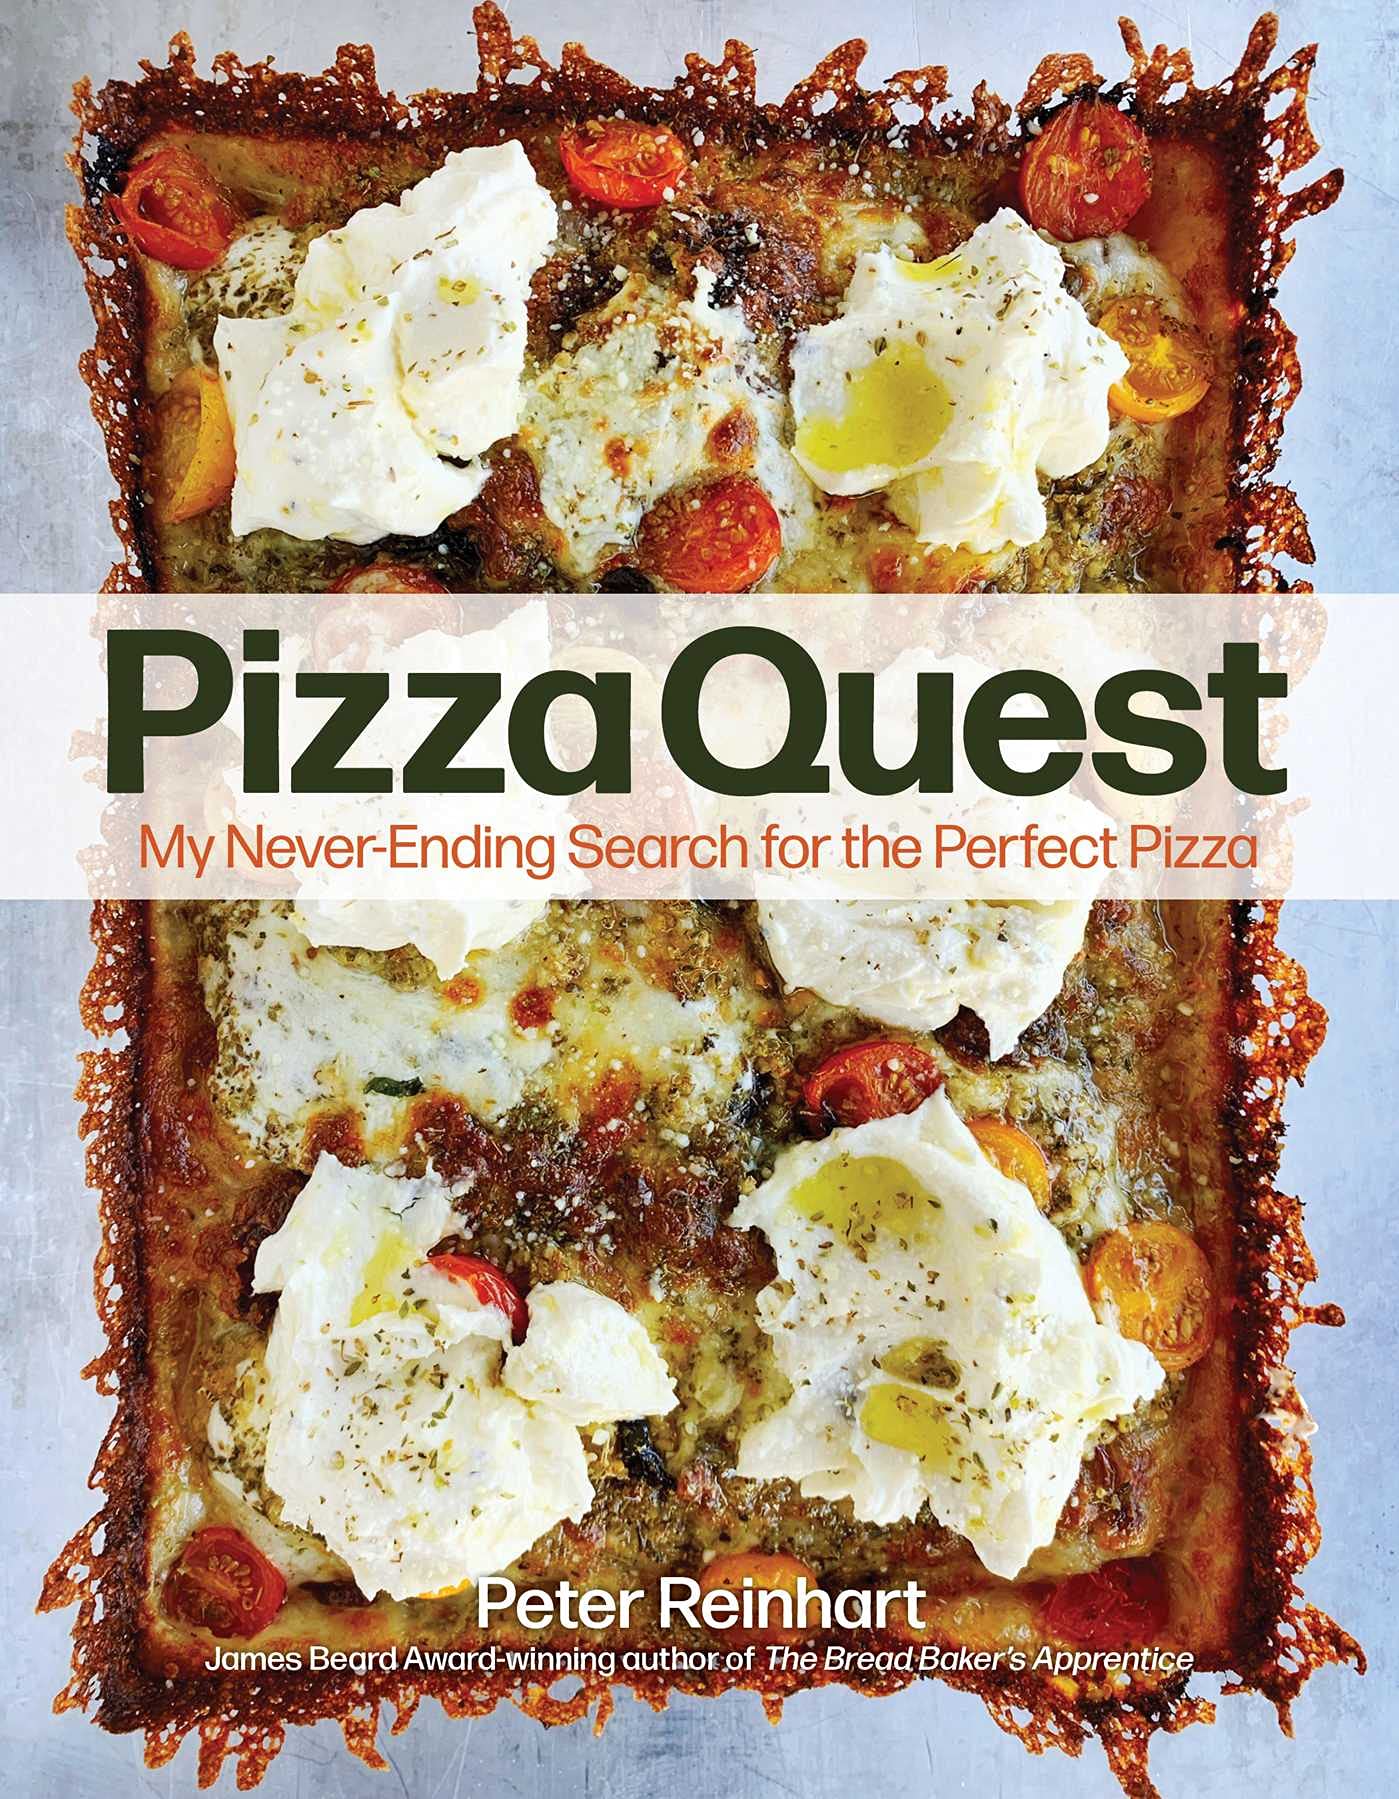 Pizza Quest: My Never-Ending Search for the Perfect Pizza (Peter Reinhart) *Signed*